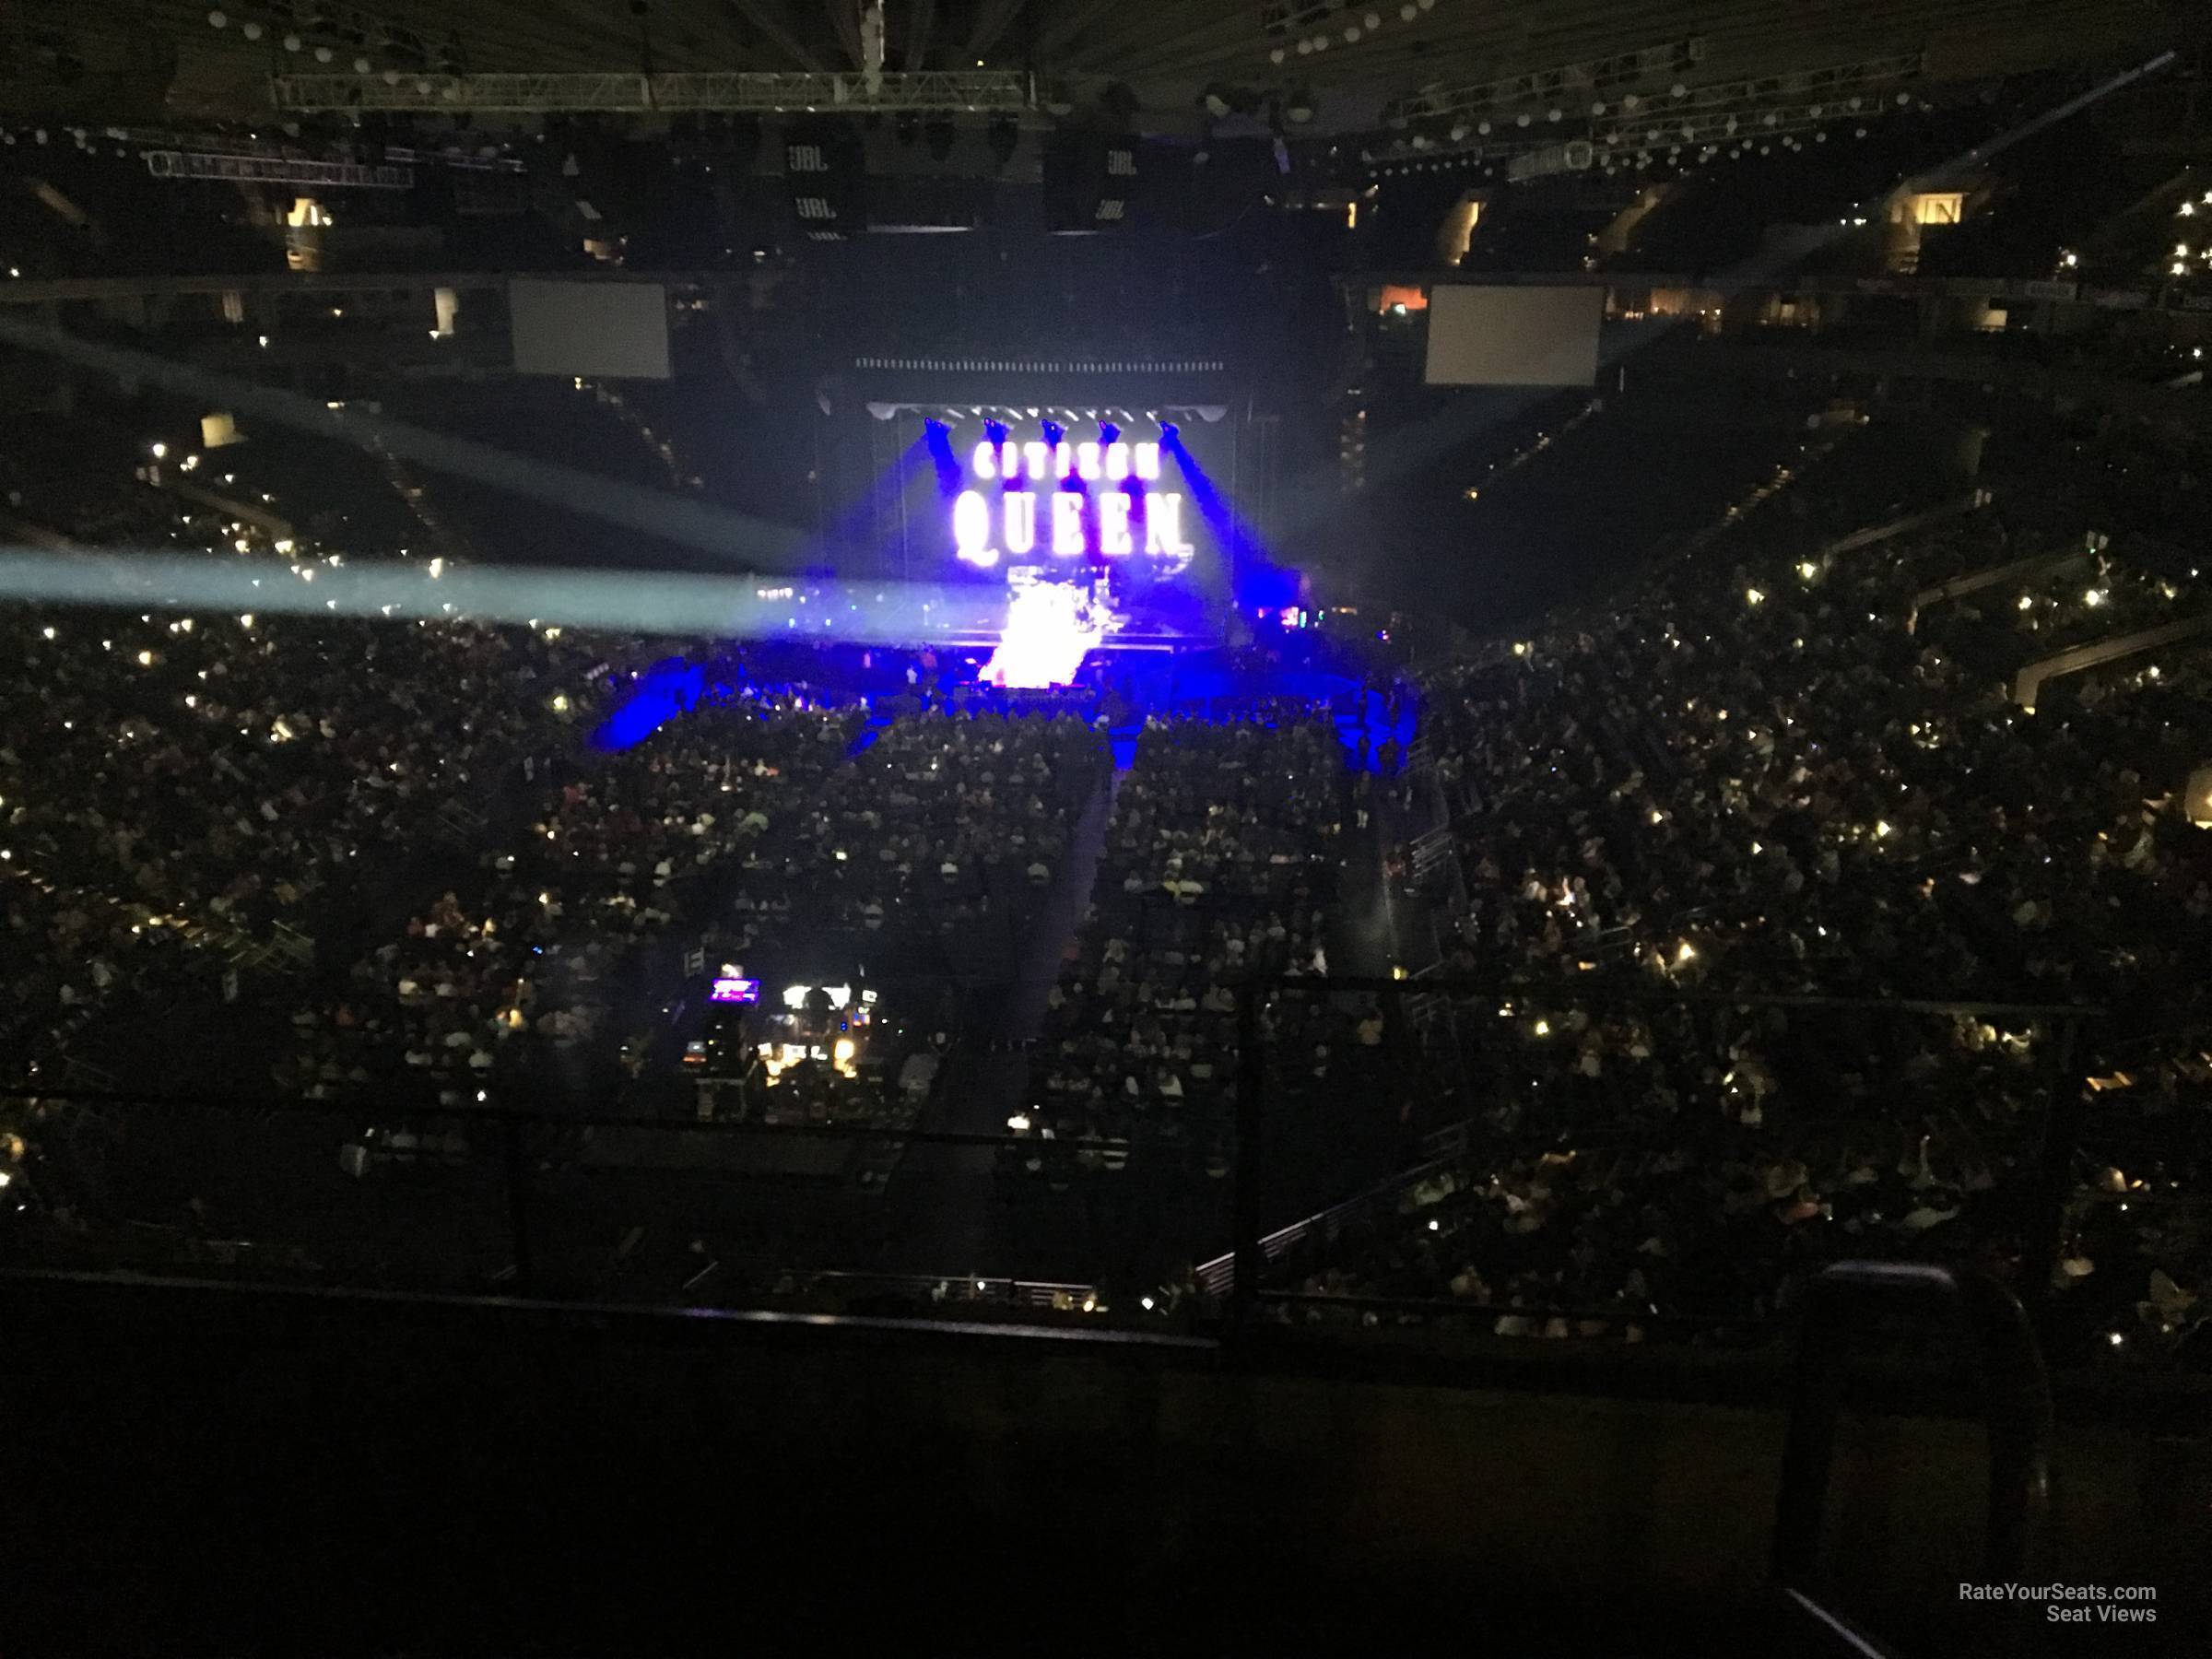 section 208, row 3 seat view  - oakland arena